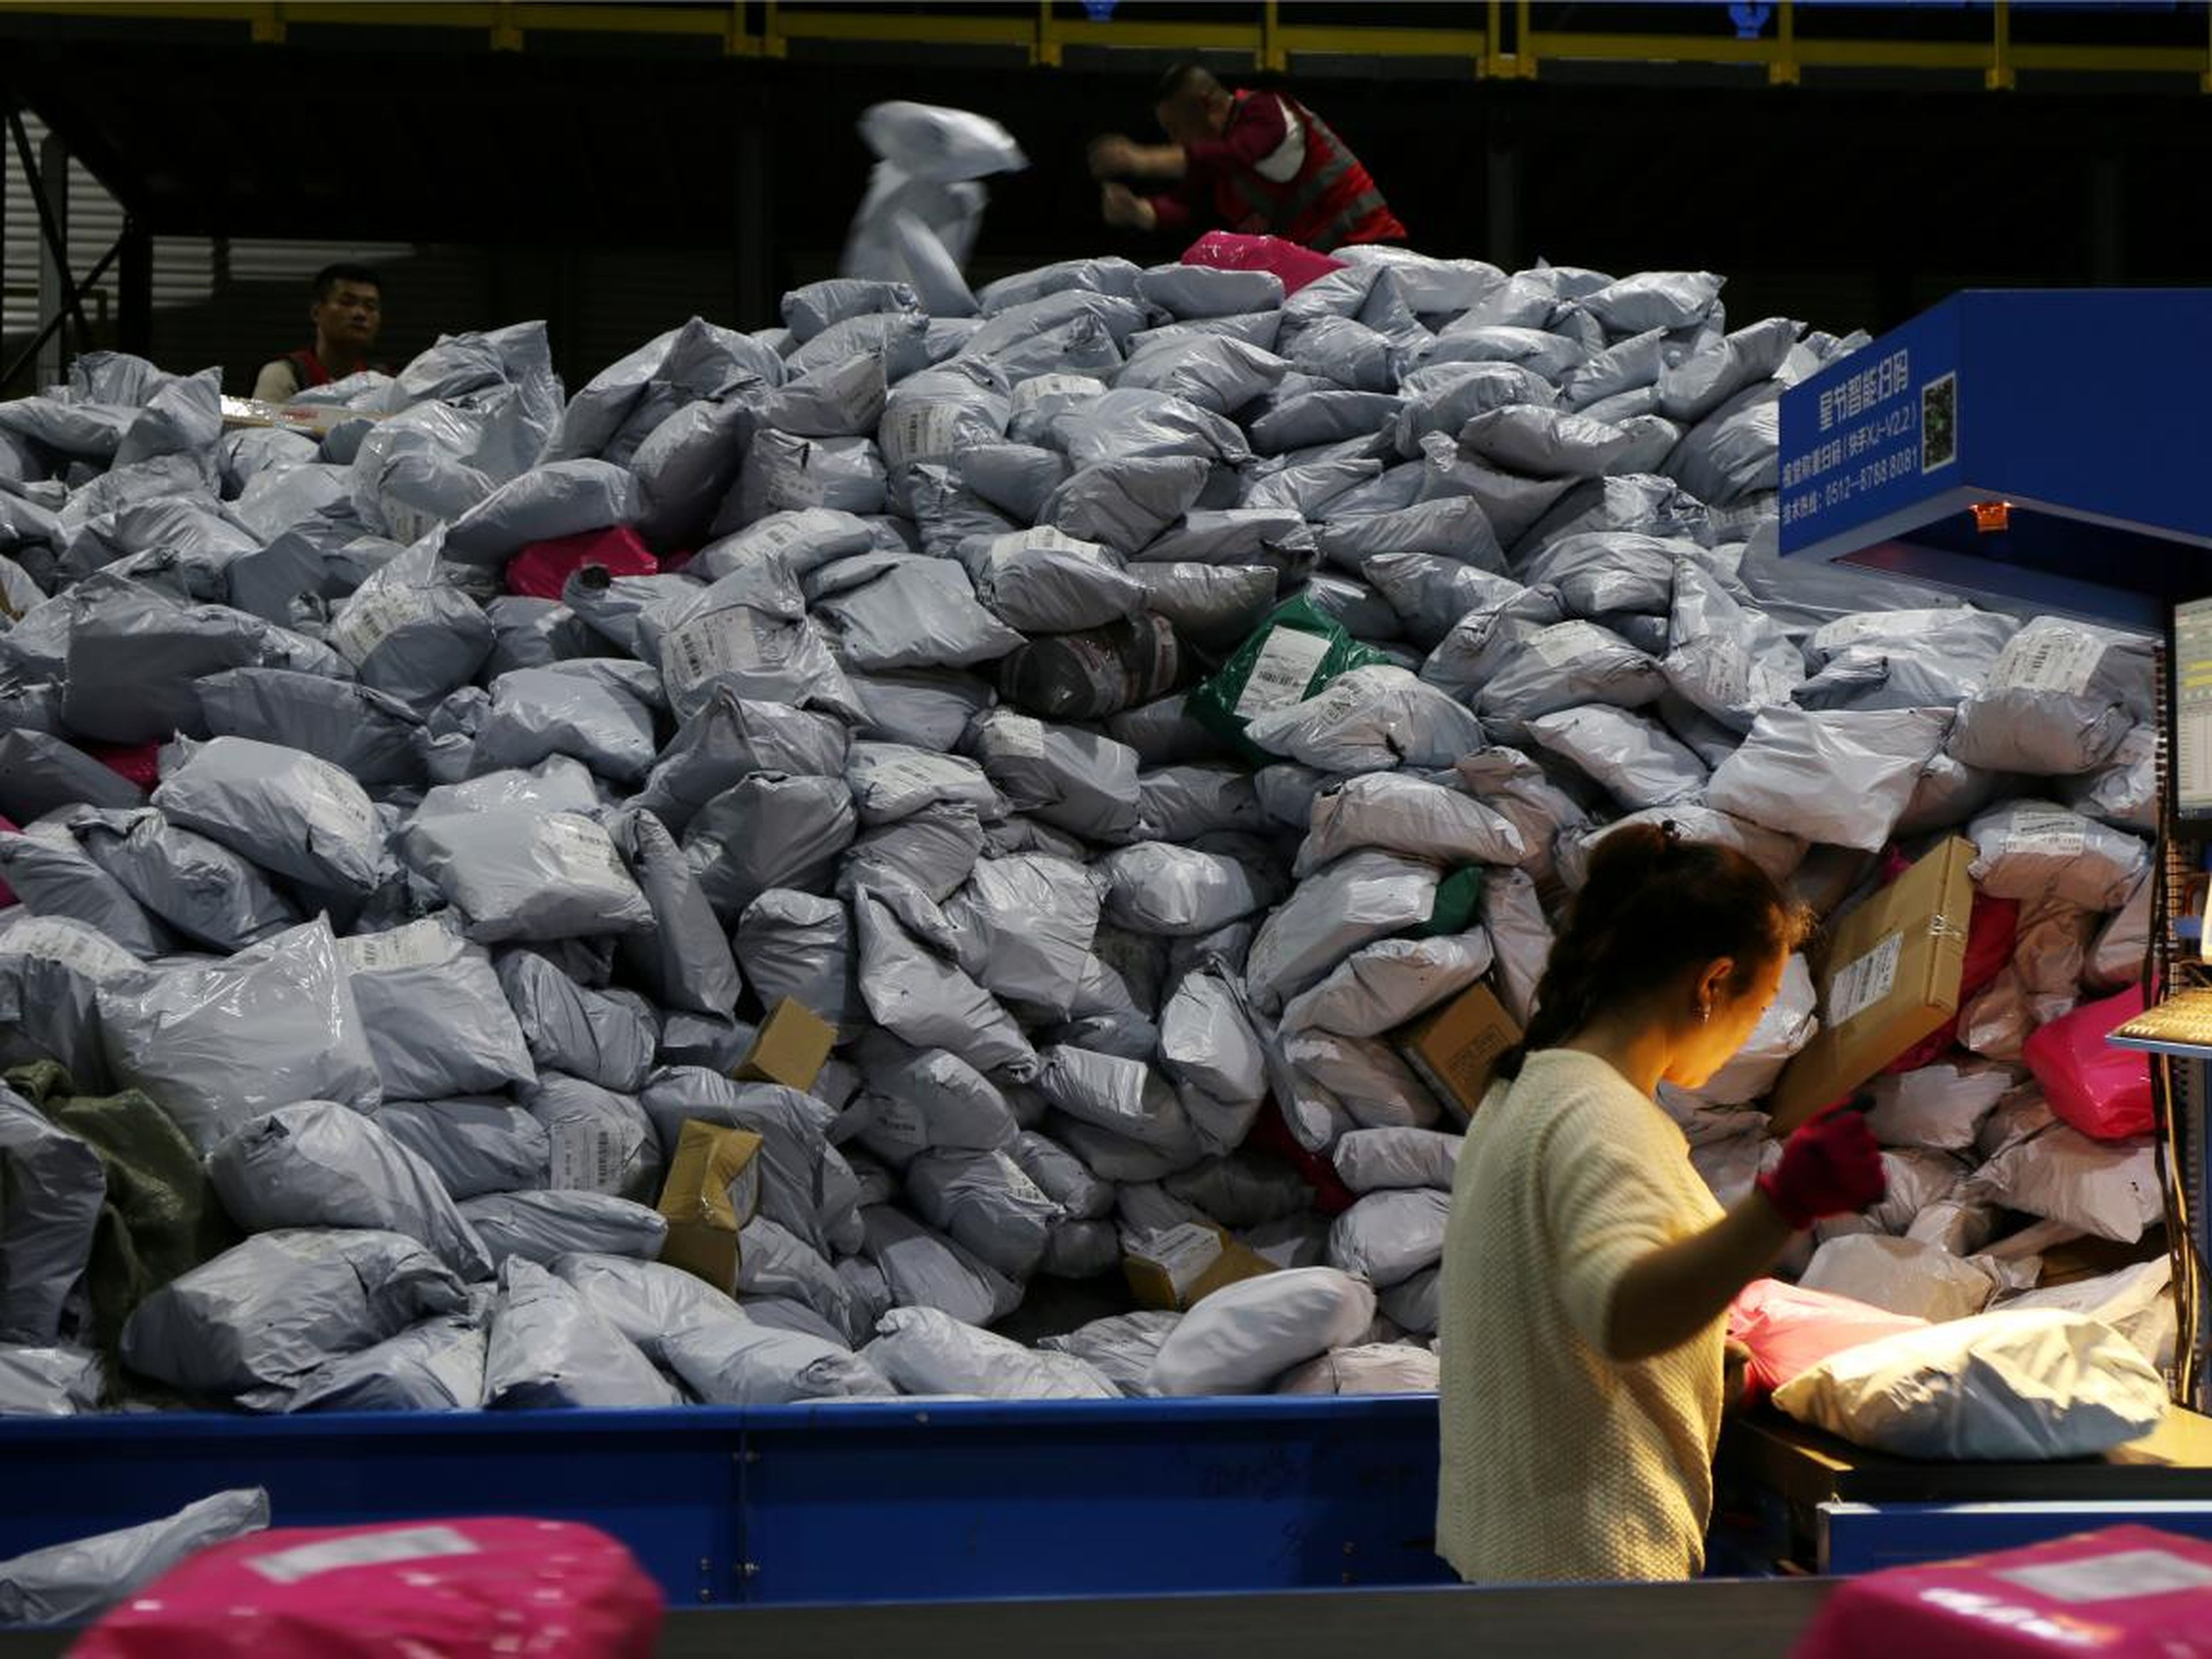 A large number of packages are already being sorted following the world's biggest 24-hour shopping day.